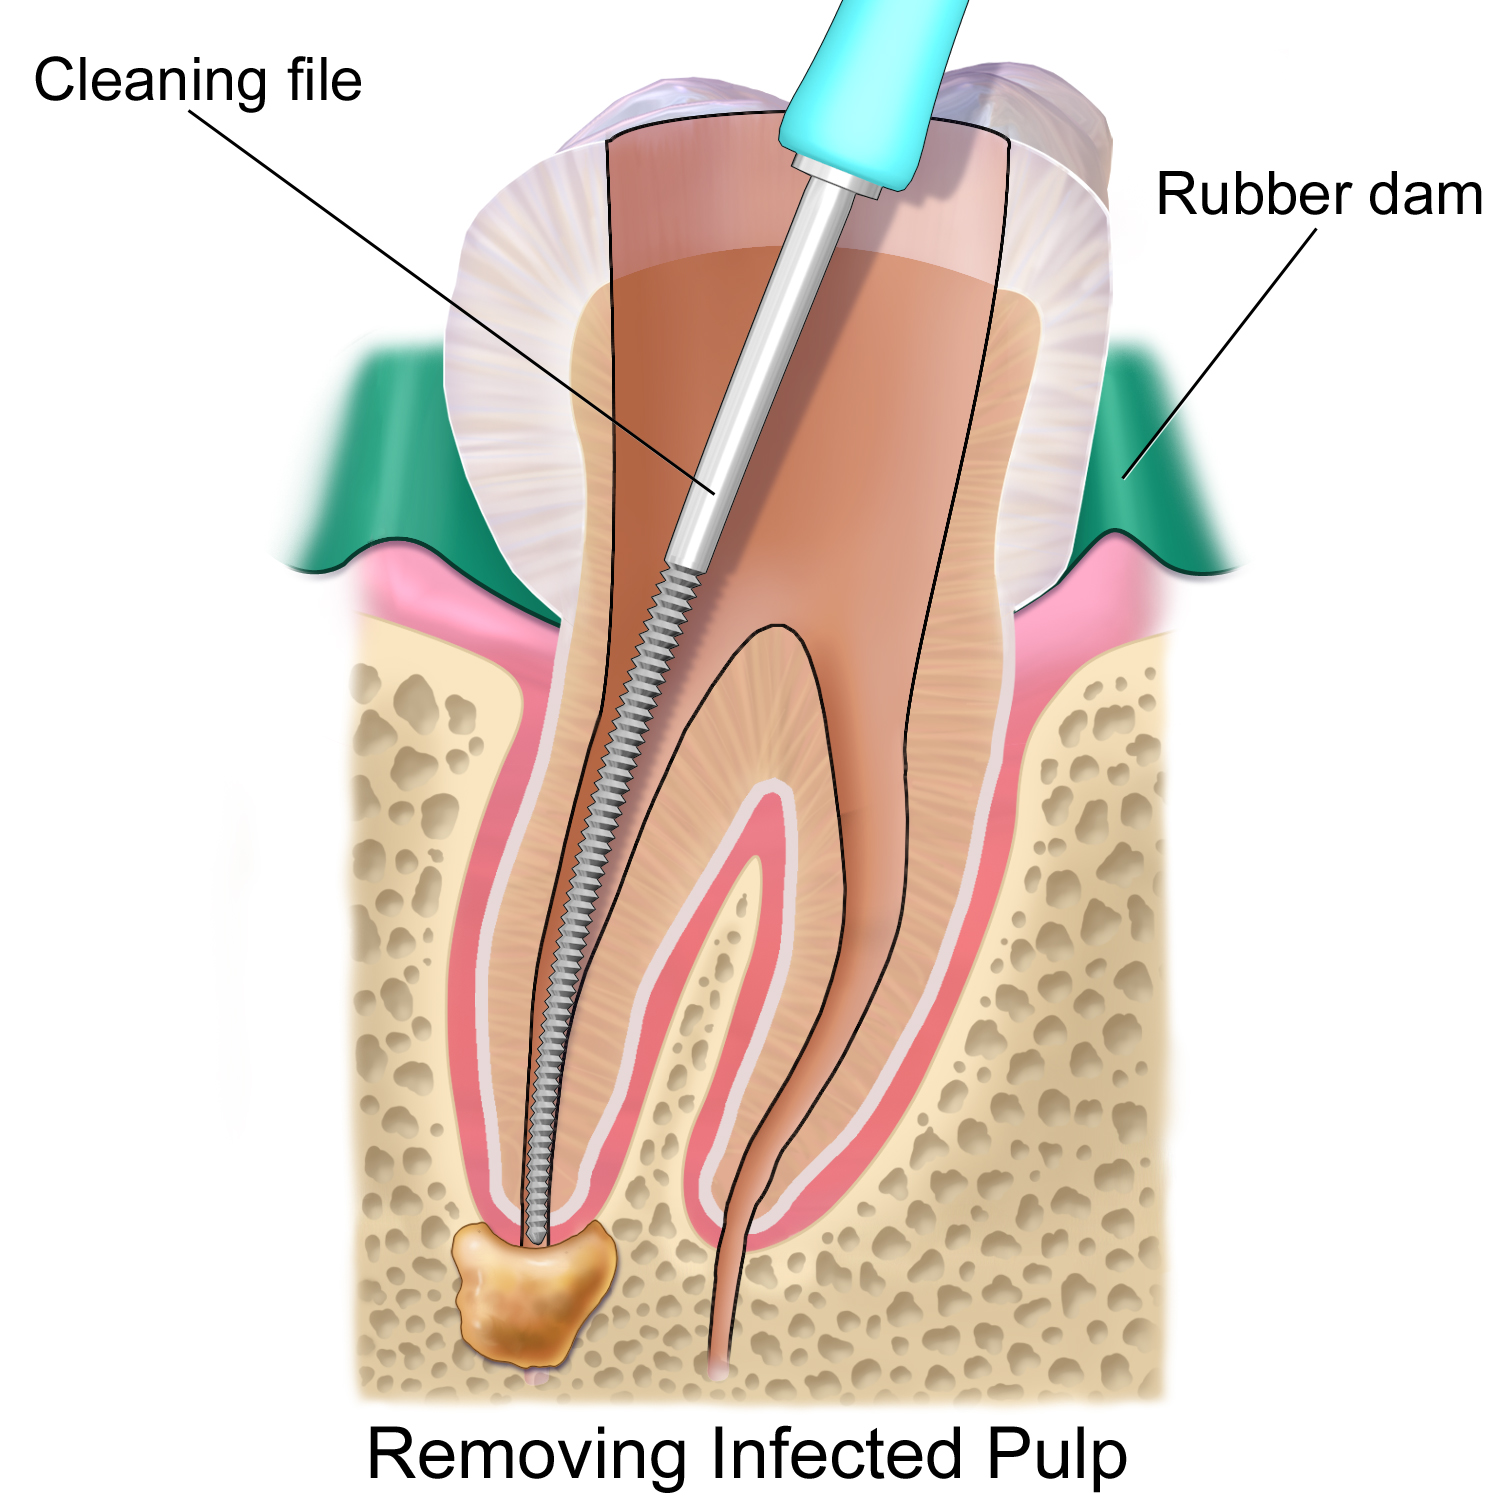 a root canal procedure may save your life from an infected tooth